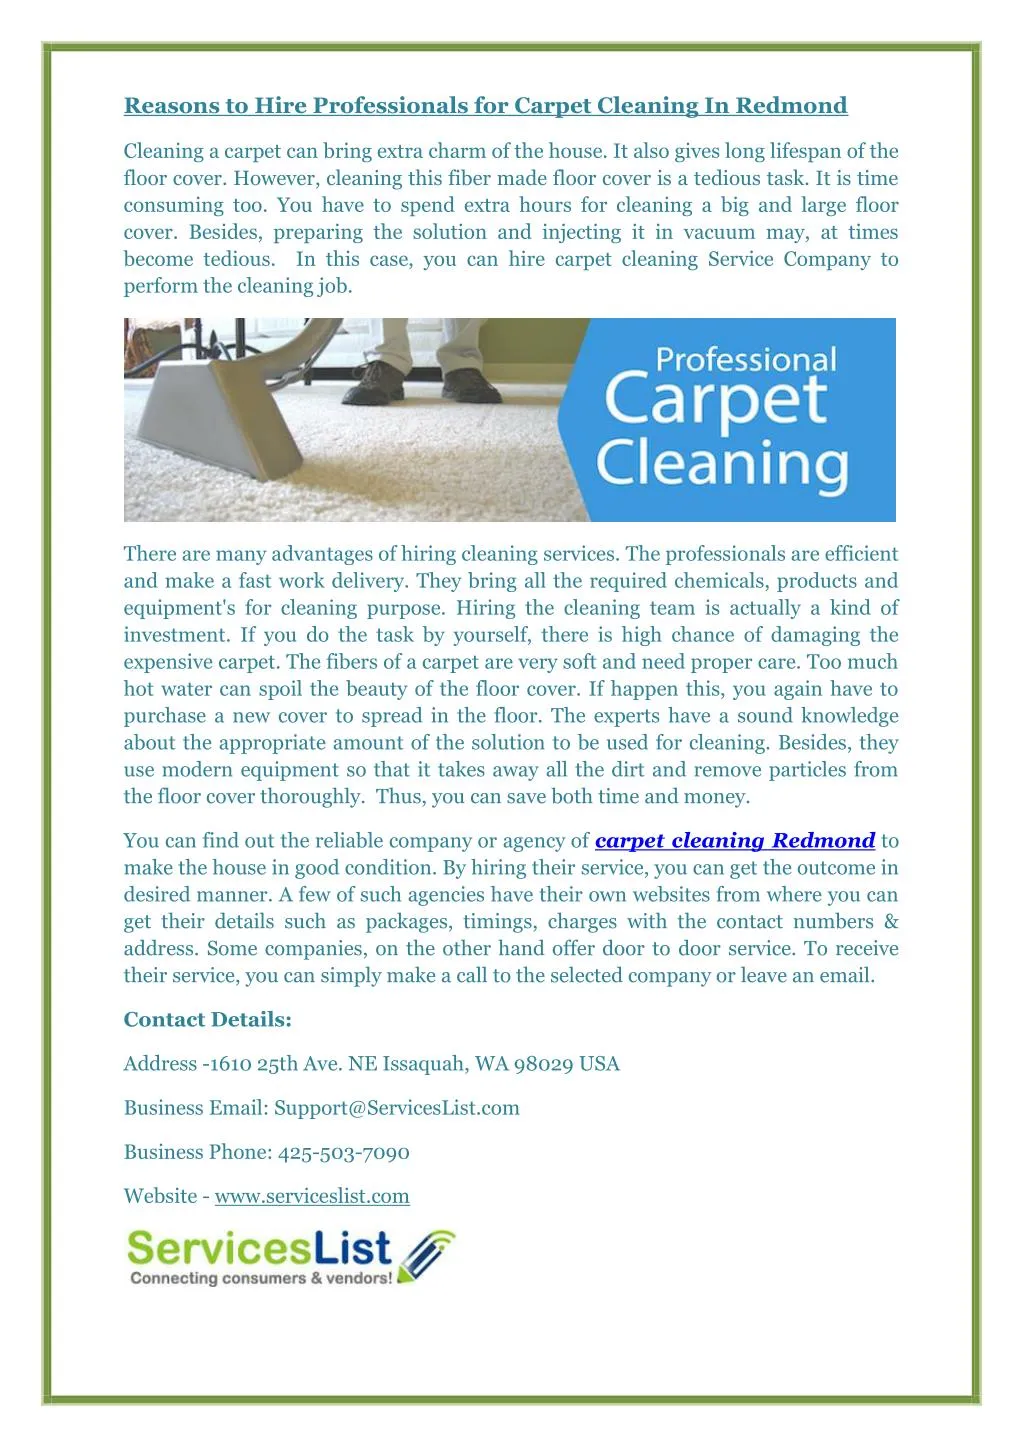 PPT - Reasons to Hire Professionals for Carpet Cleaning In ...